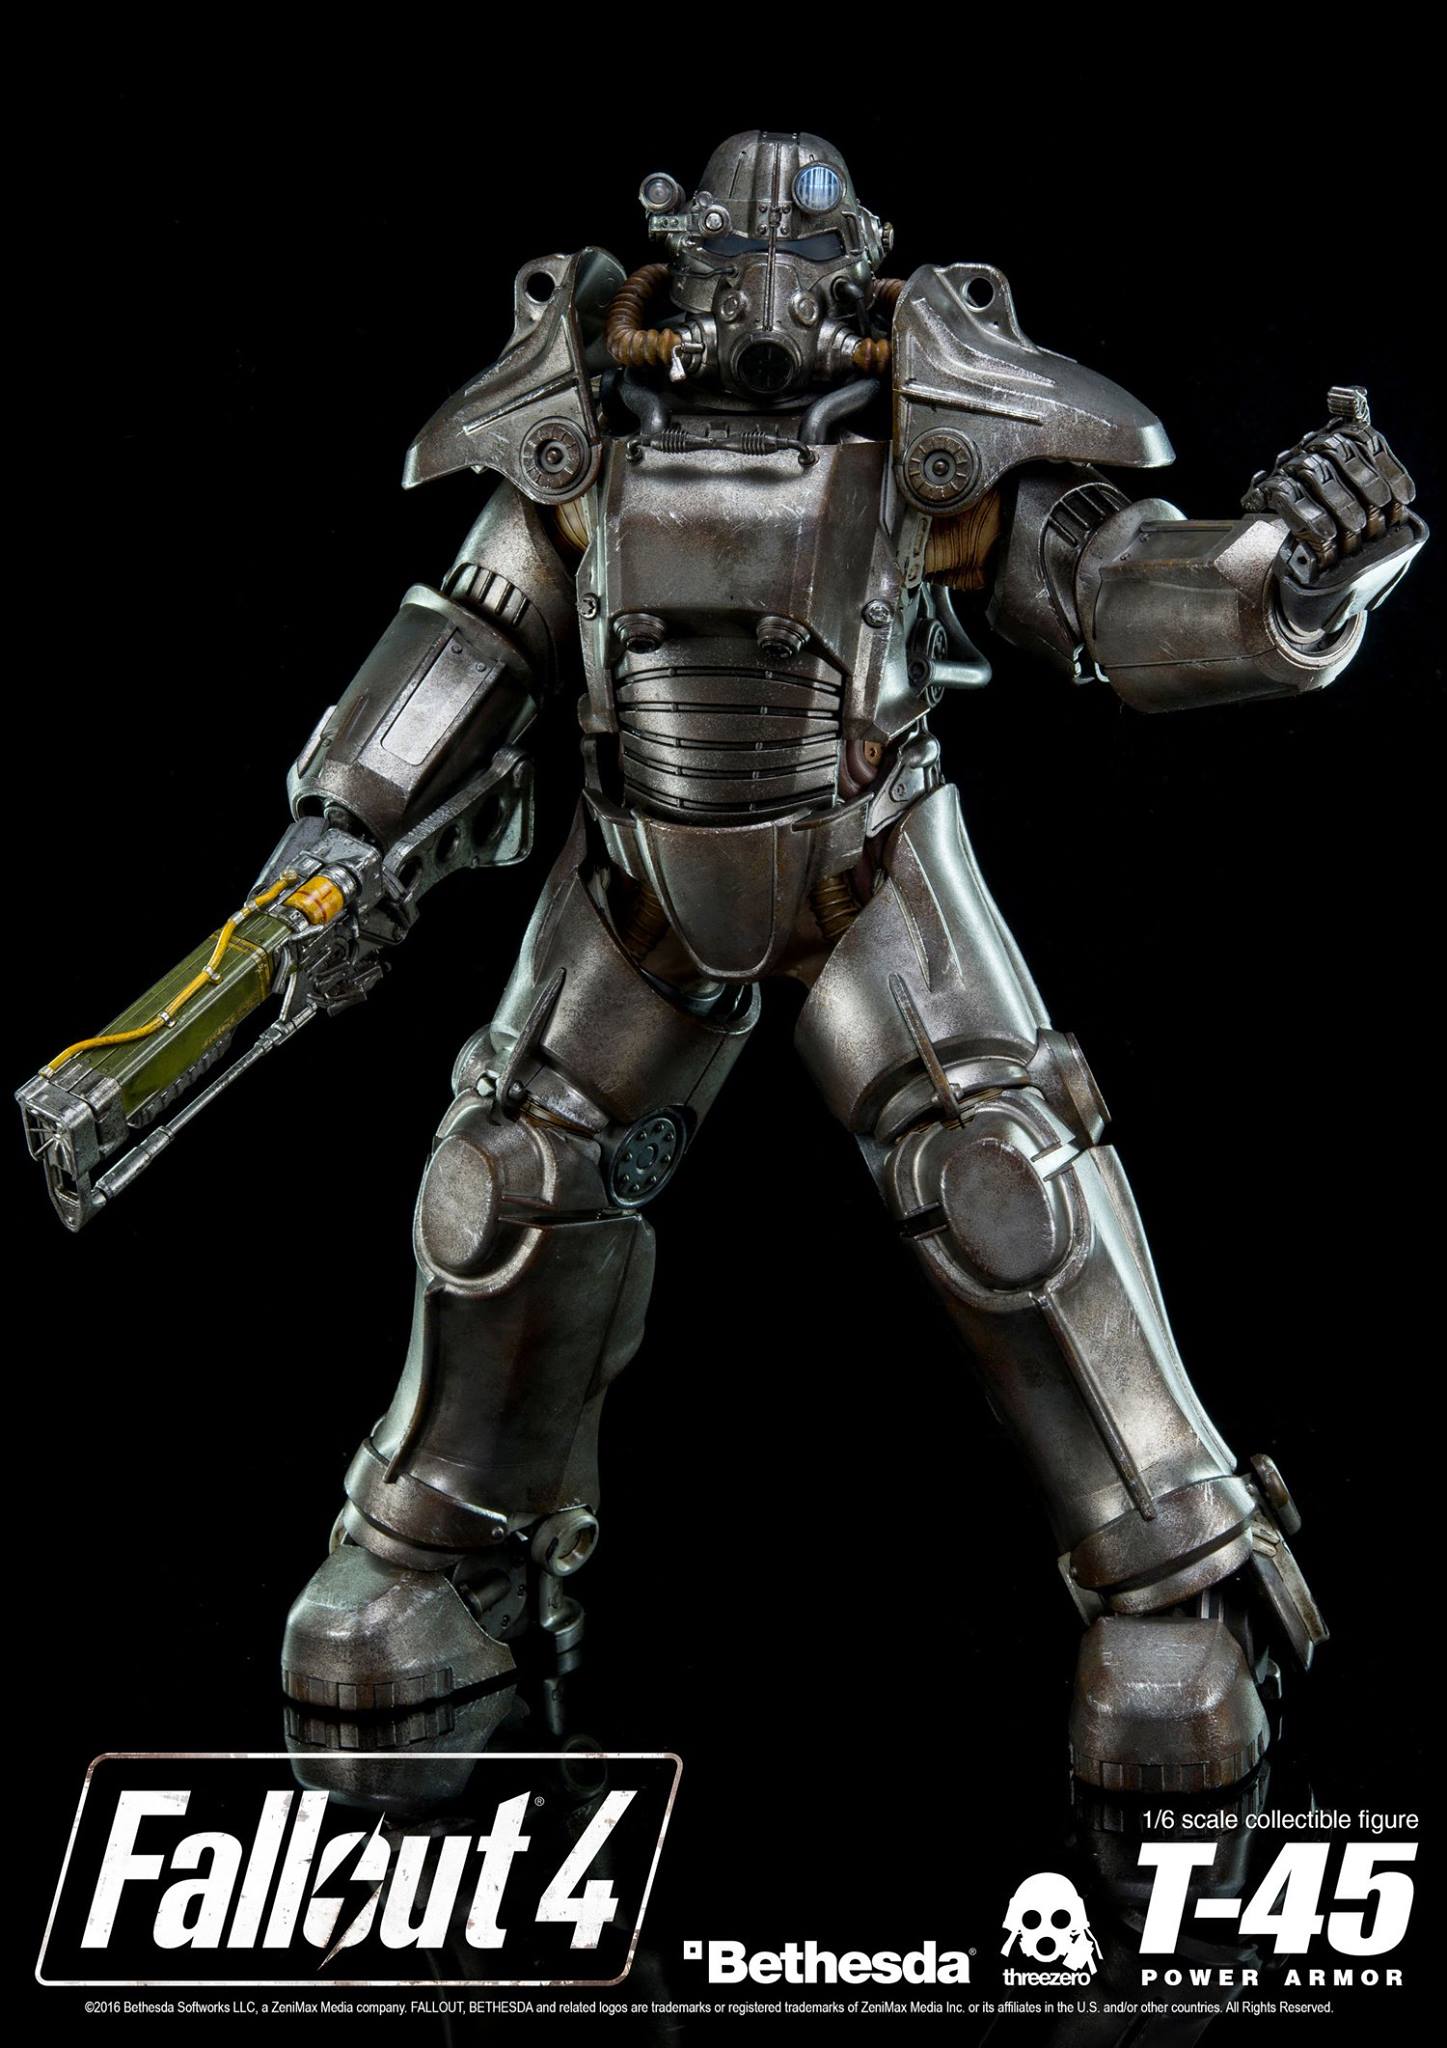 Look At This $400 Fallout 4 Figure